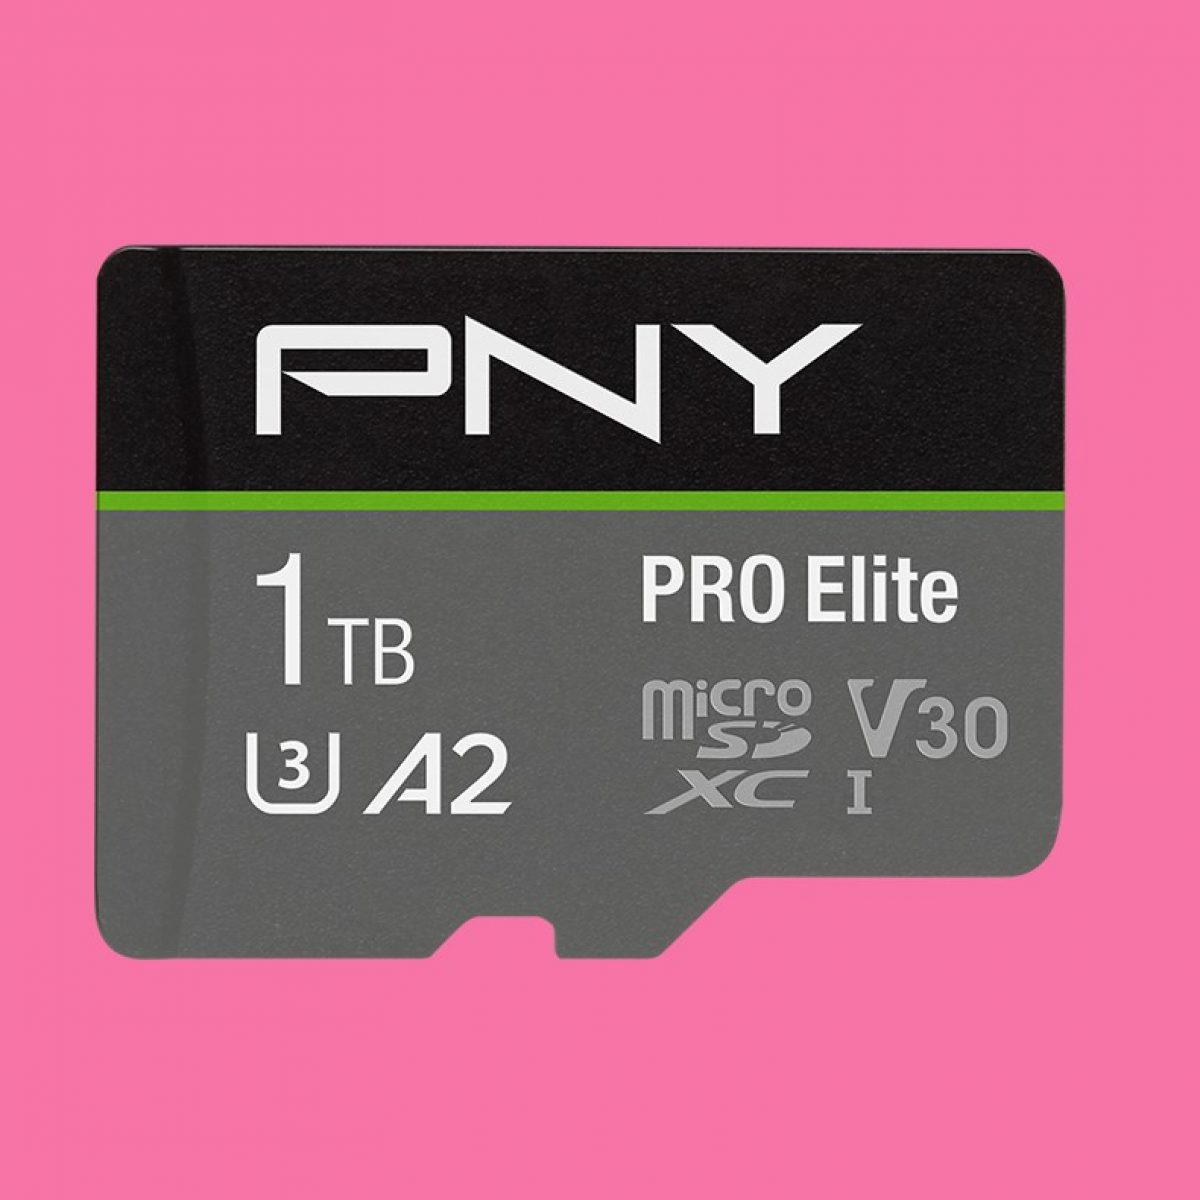 Pny S New 1tb Microsd Card Is Priced Incredibly Well